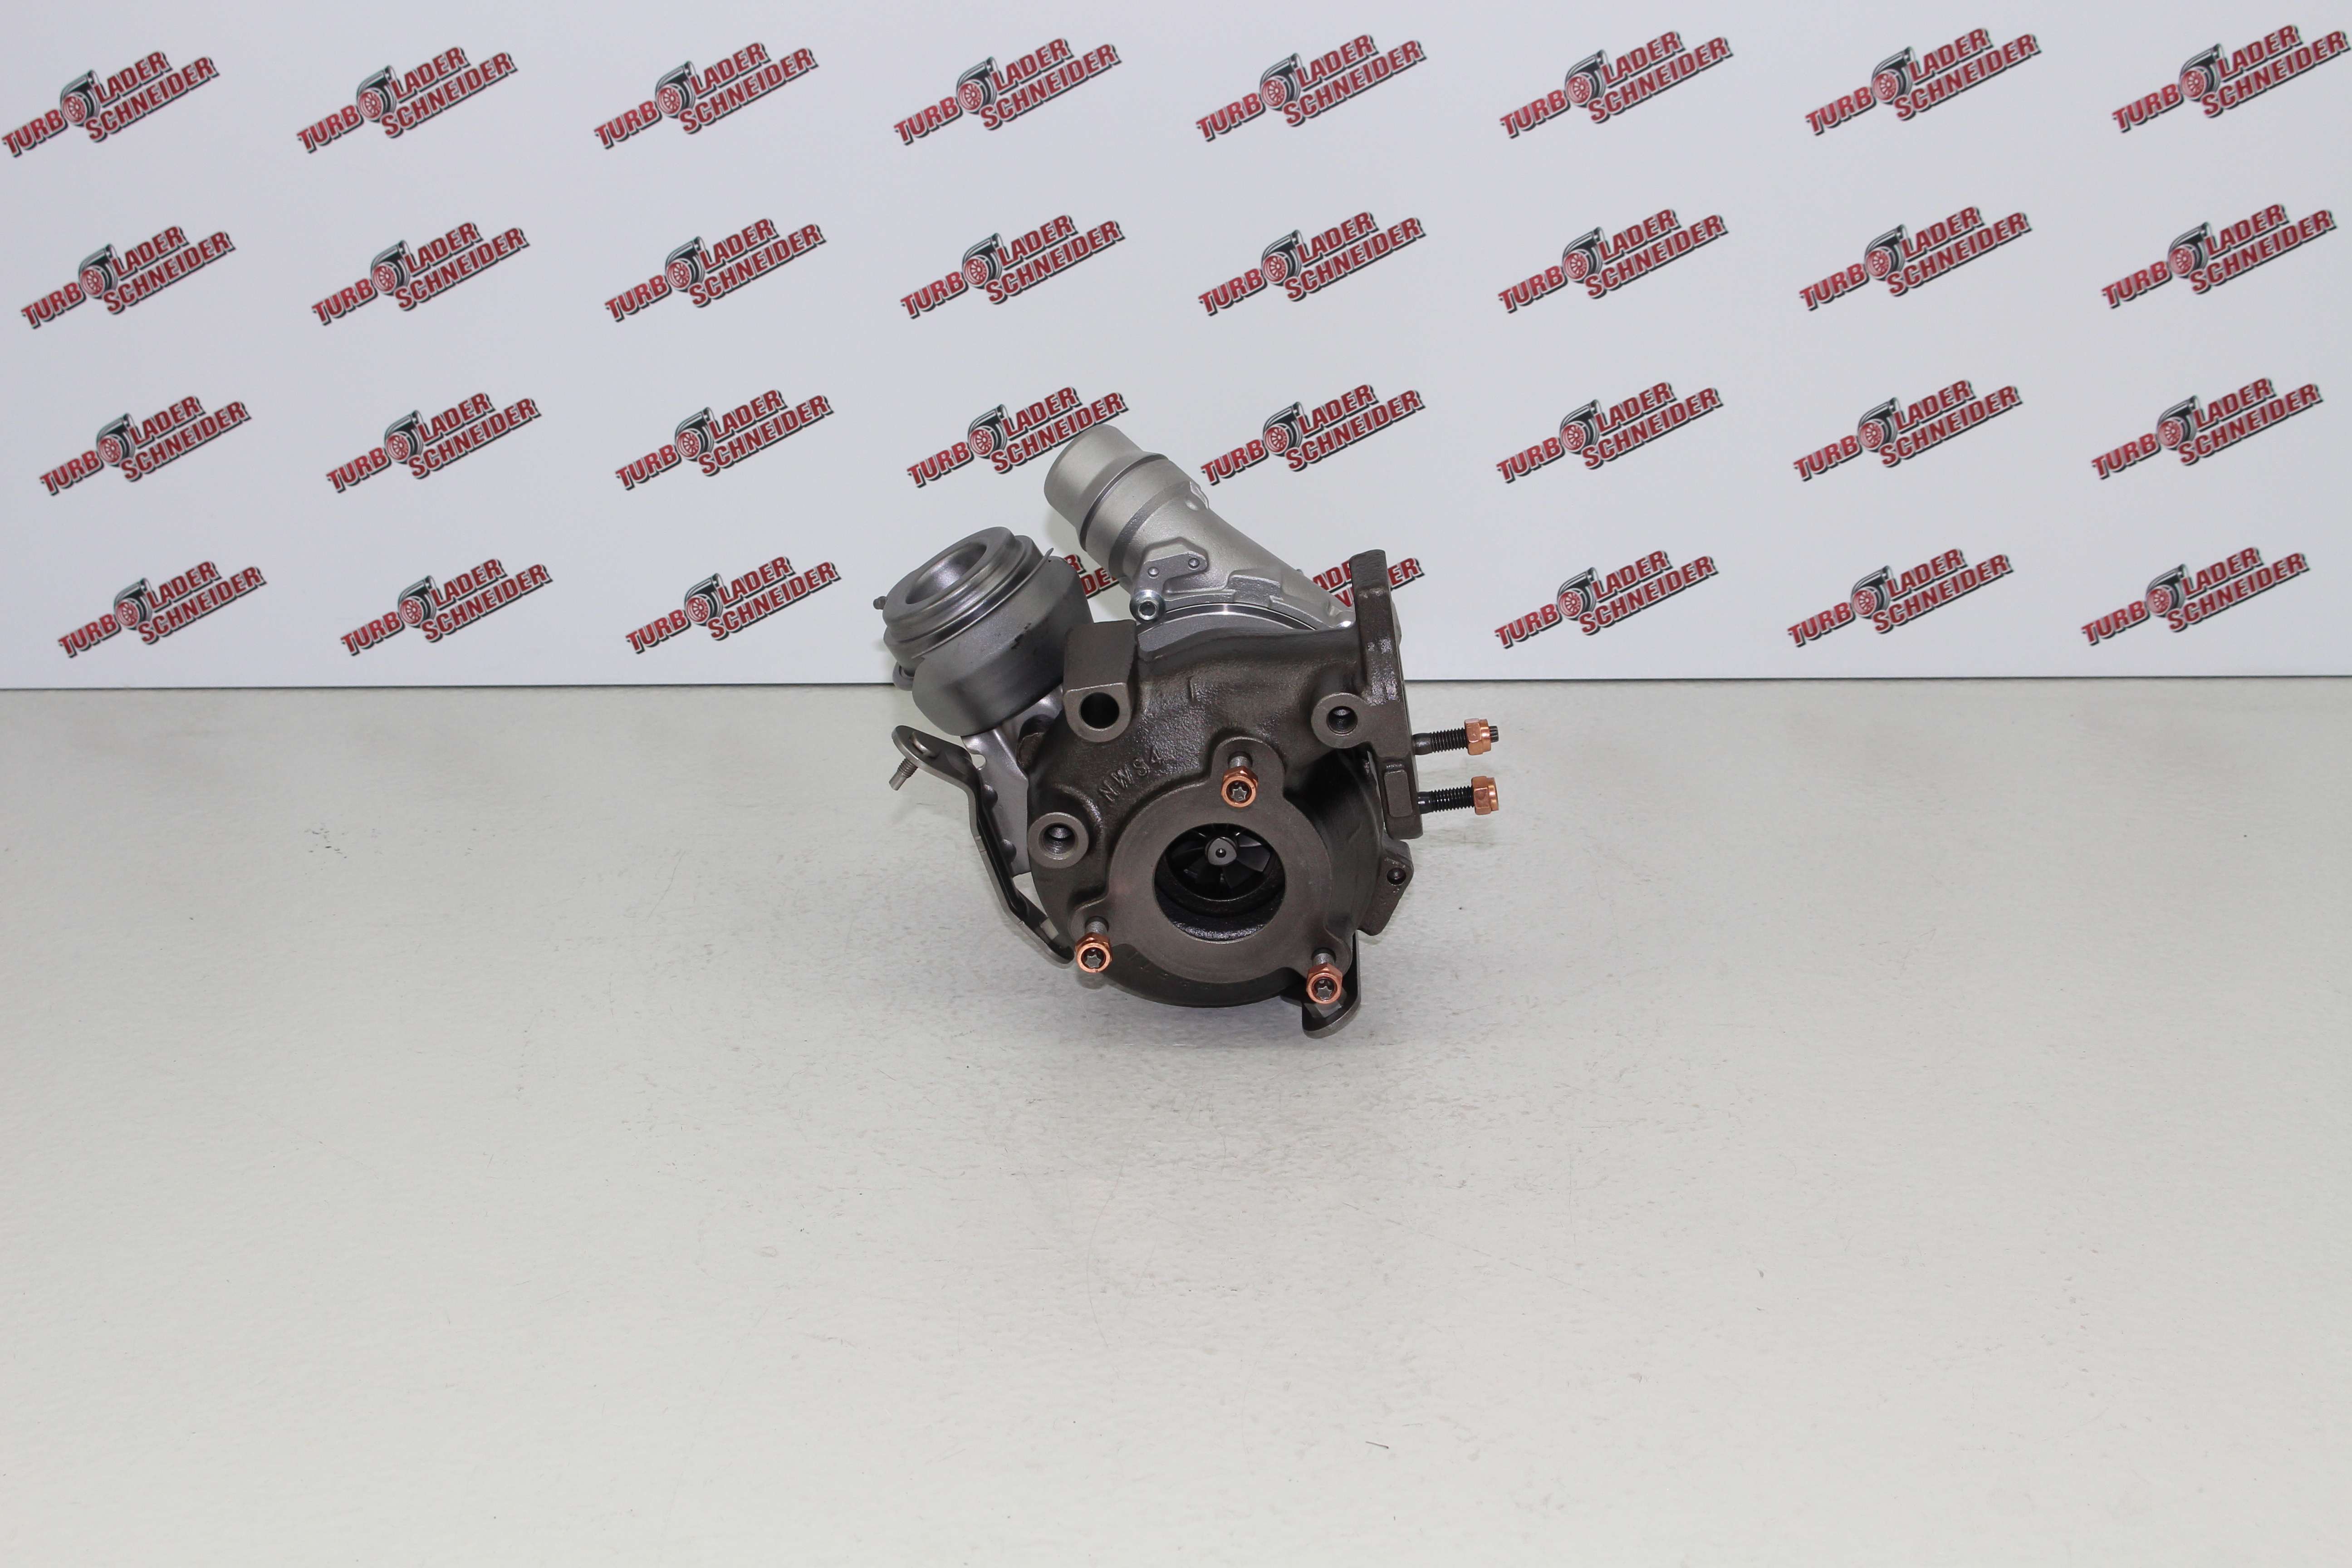 Turbolader Nissan/Renault 2.0 dCi 96-131 Kw